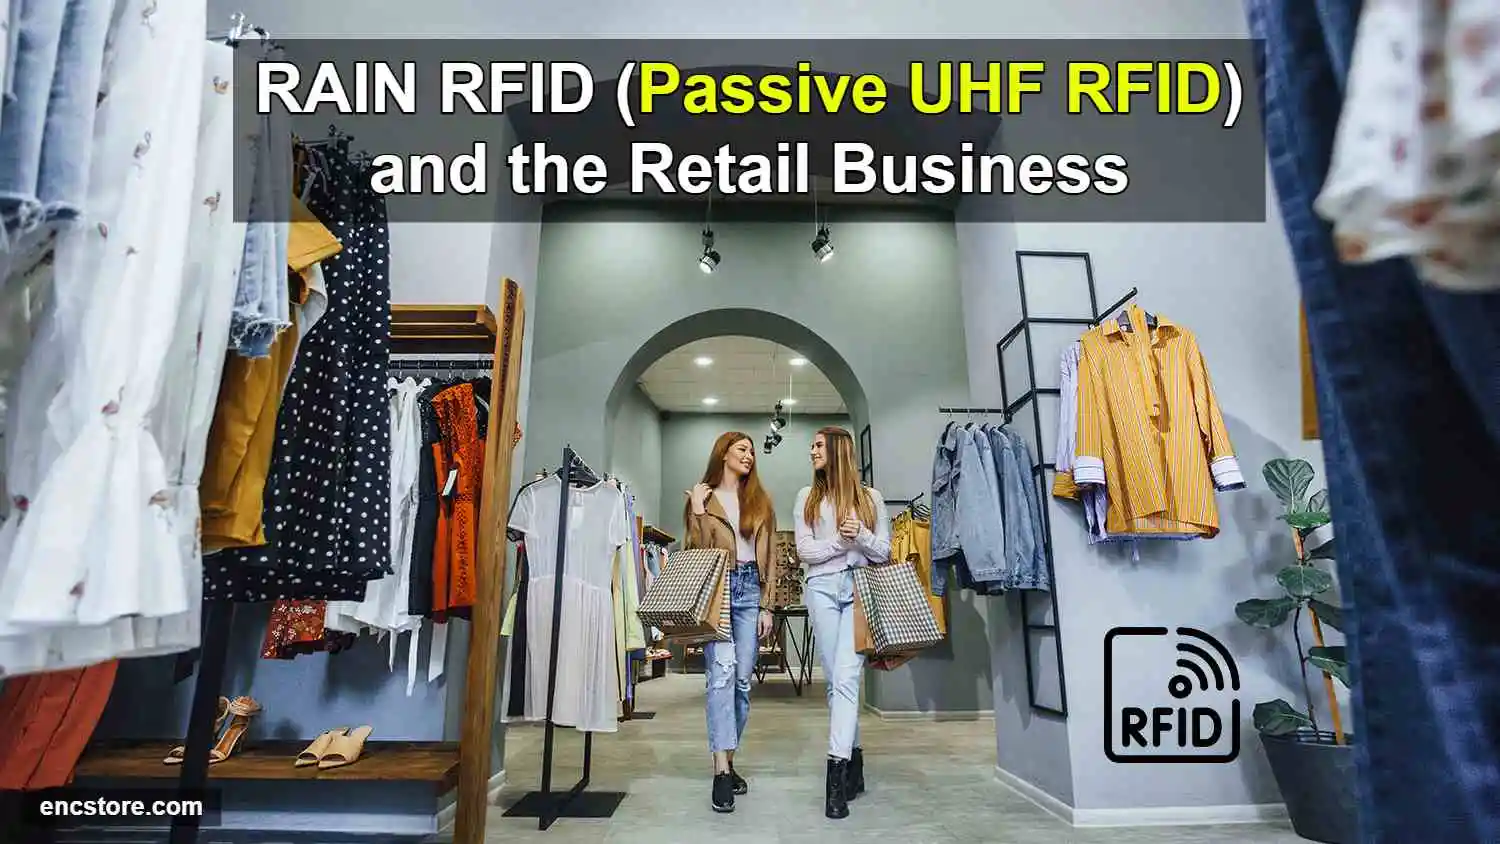 RAIN RFID and the Retail Business